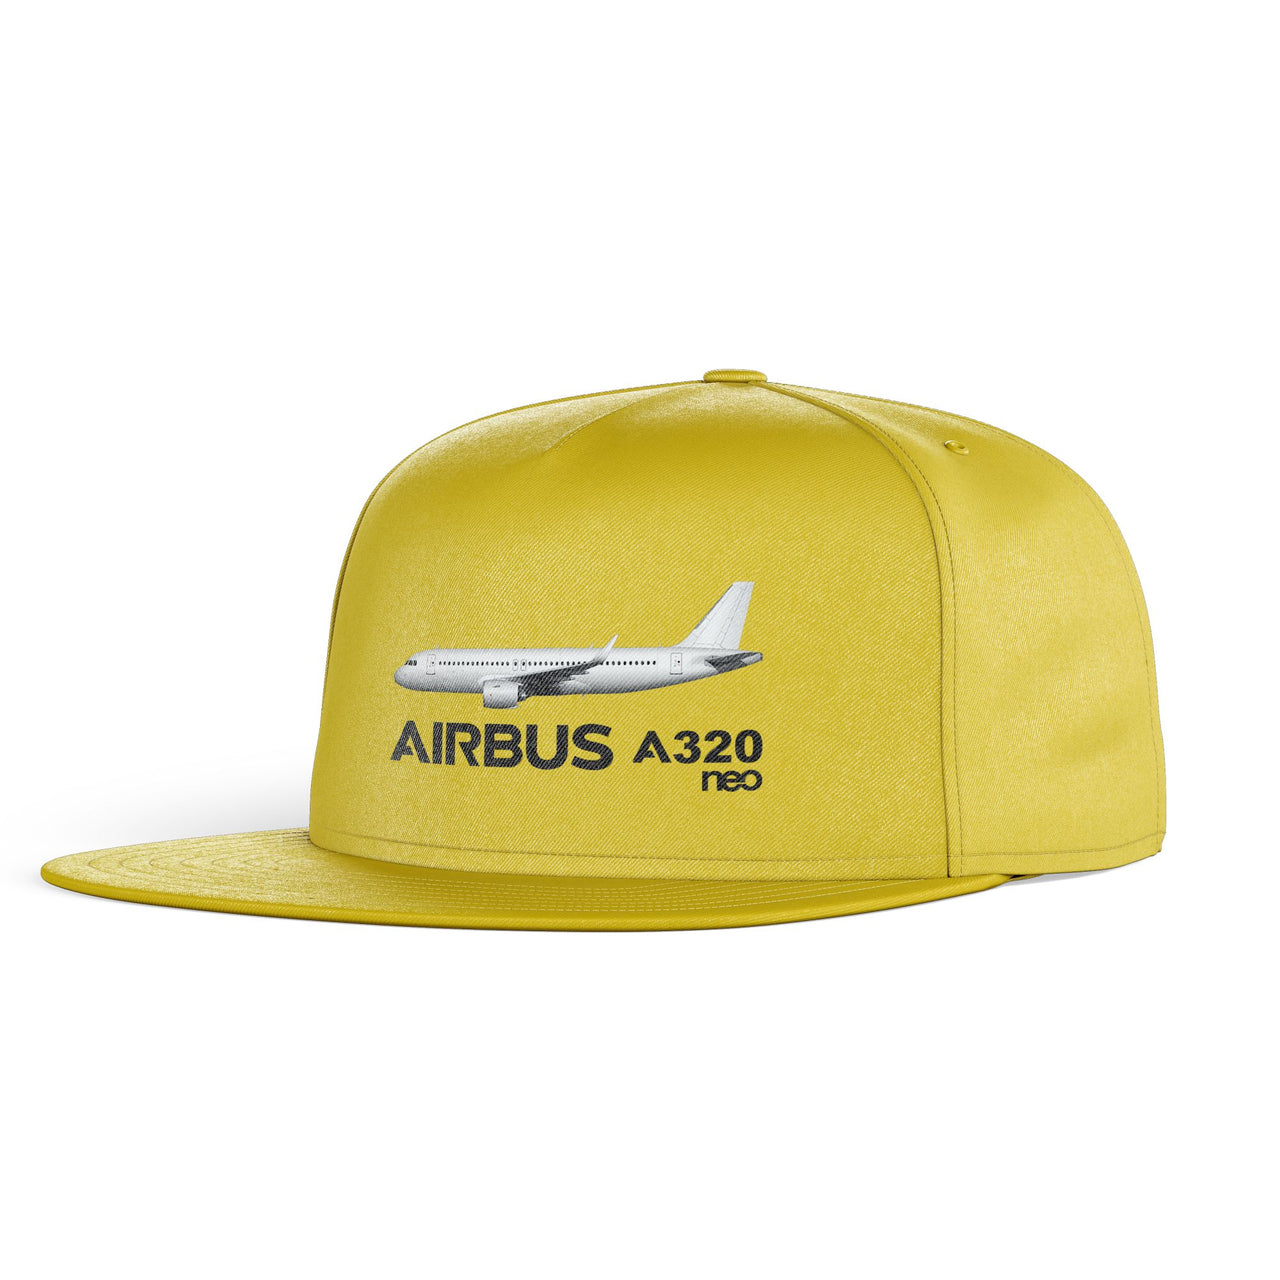 The Airbus A320Neo Designed Snapback Caps & Hats